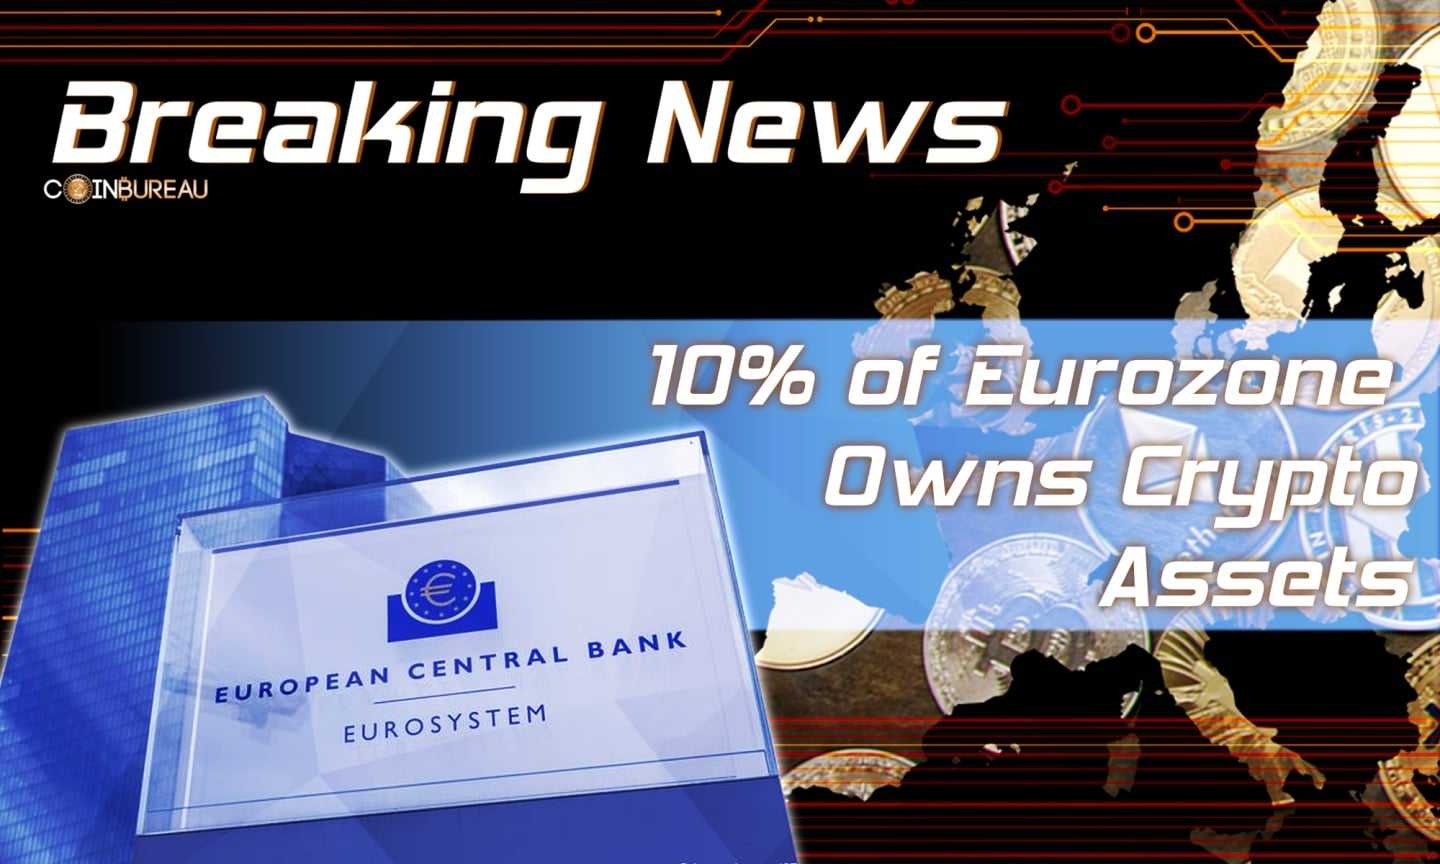 European Central Bank Report Reveals 10% of Eurozone Owns Crypto Assets